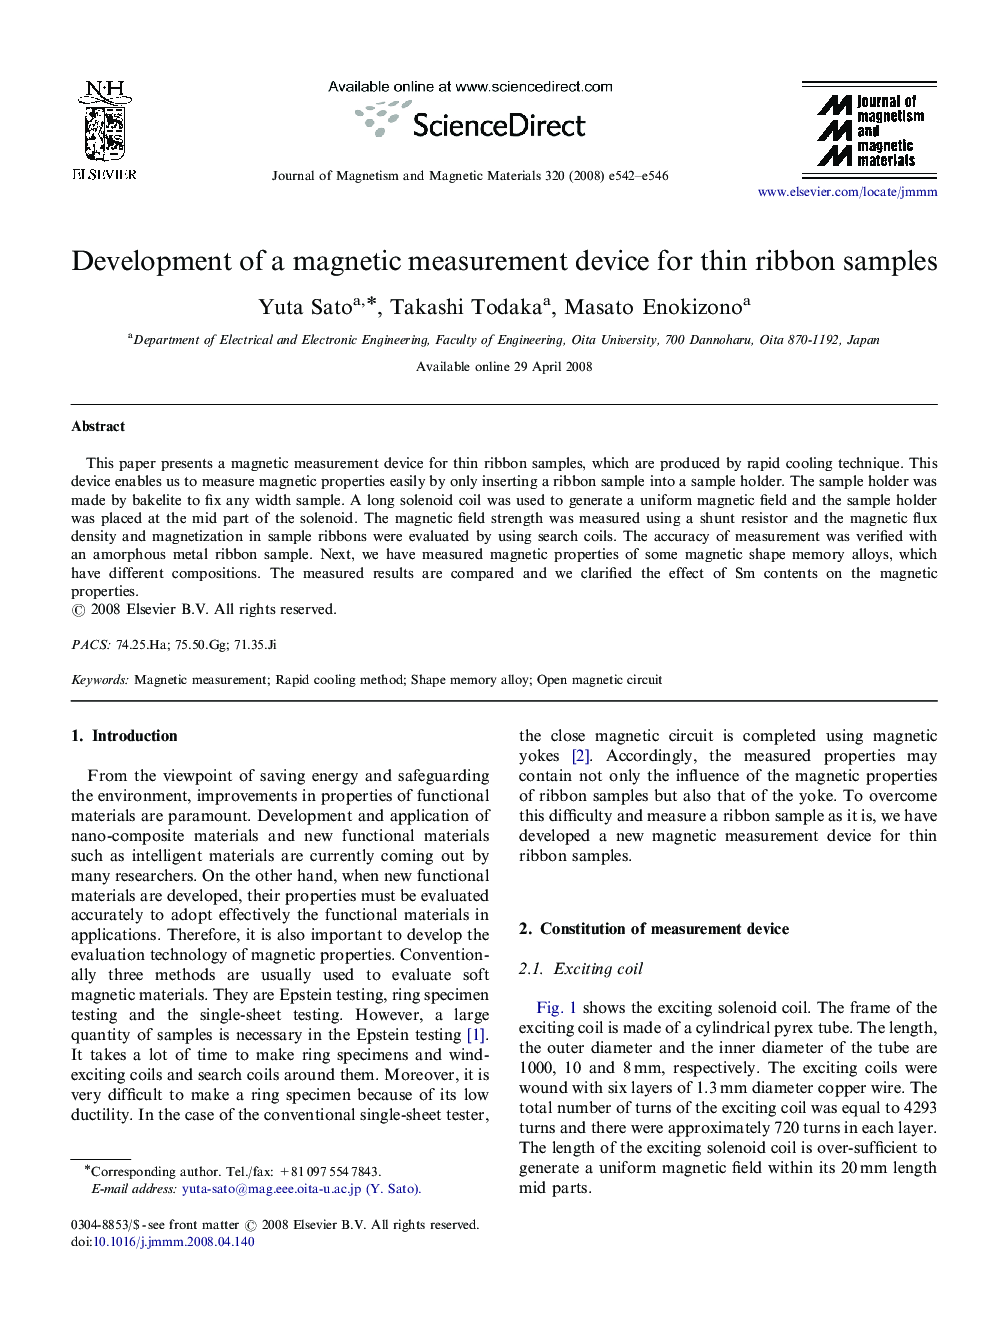 Development of a magnetic measurement device for thin ribbon samples